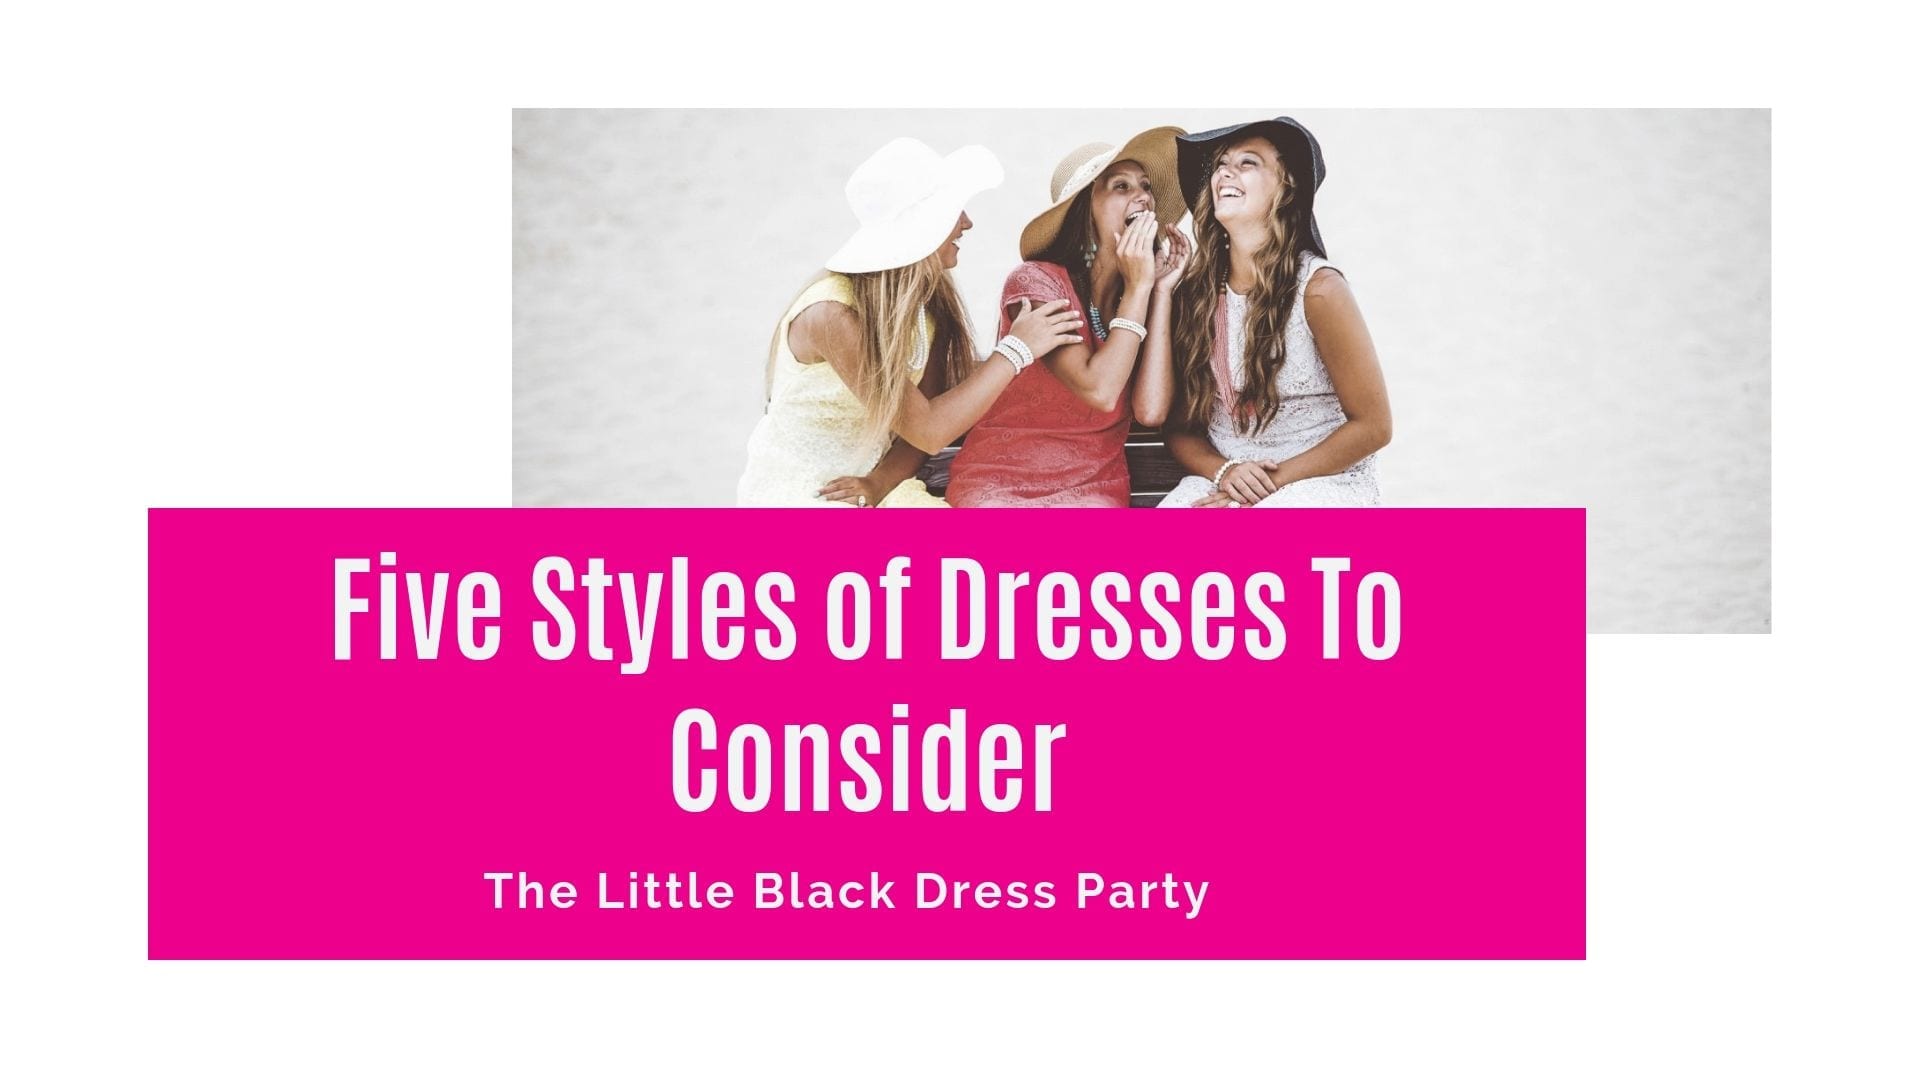 Five Styles of Dresses To Consider